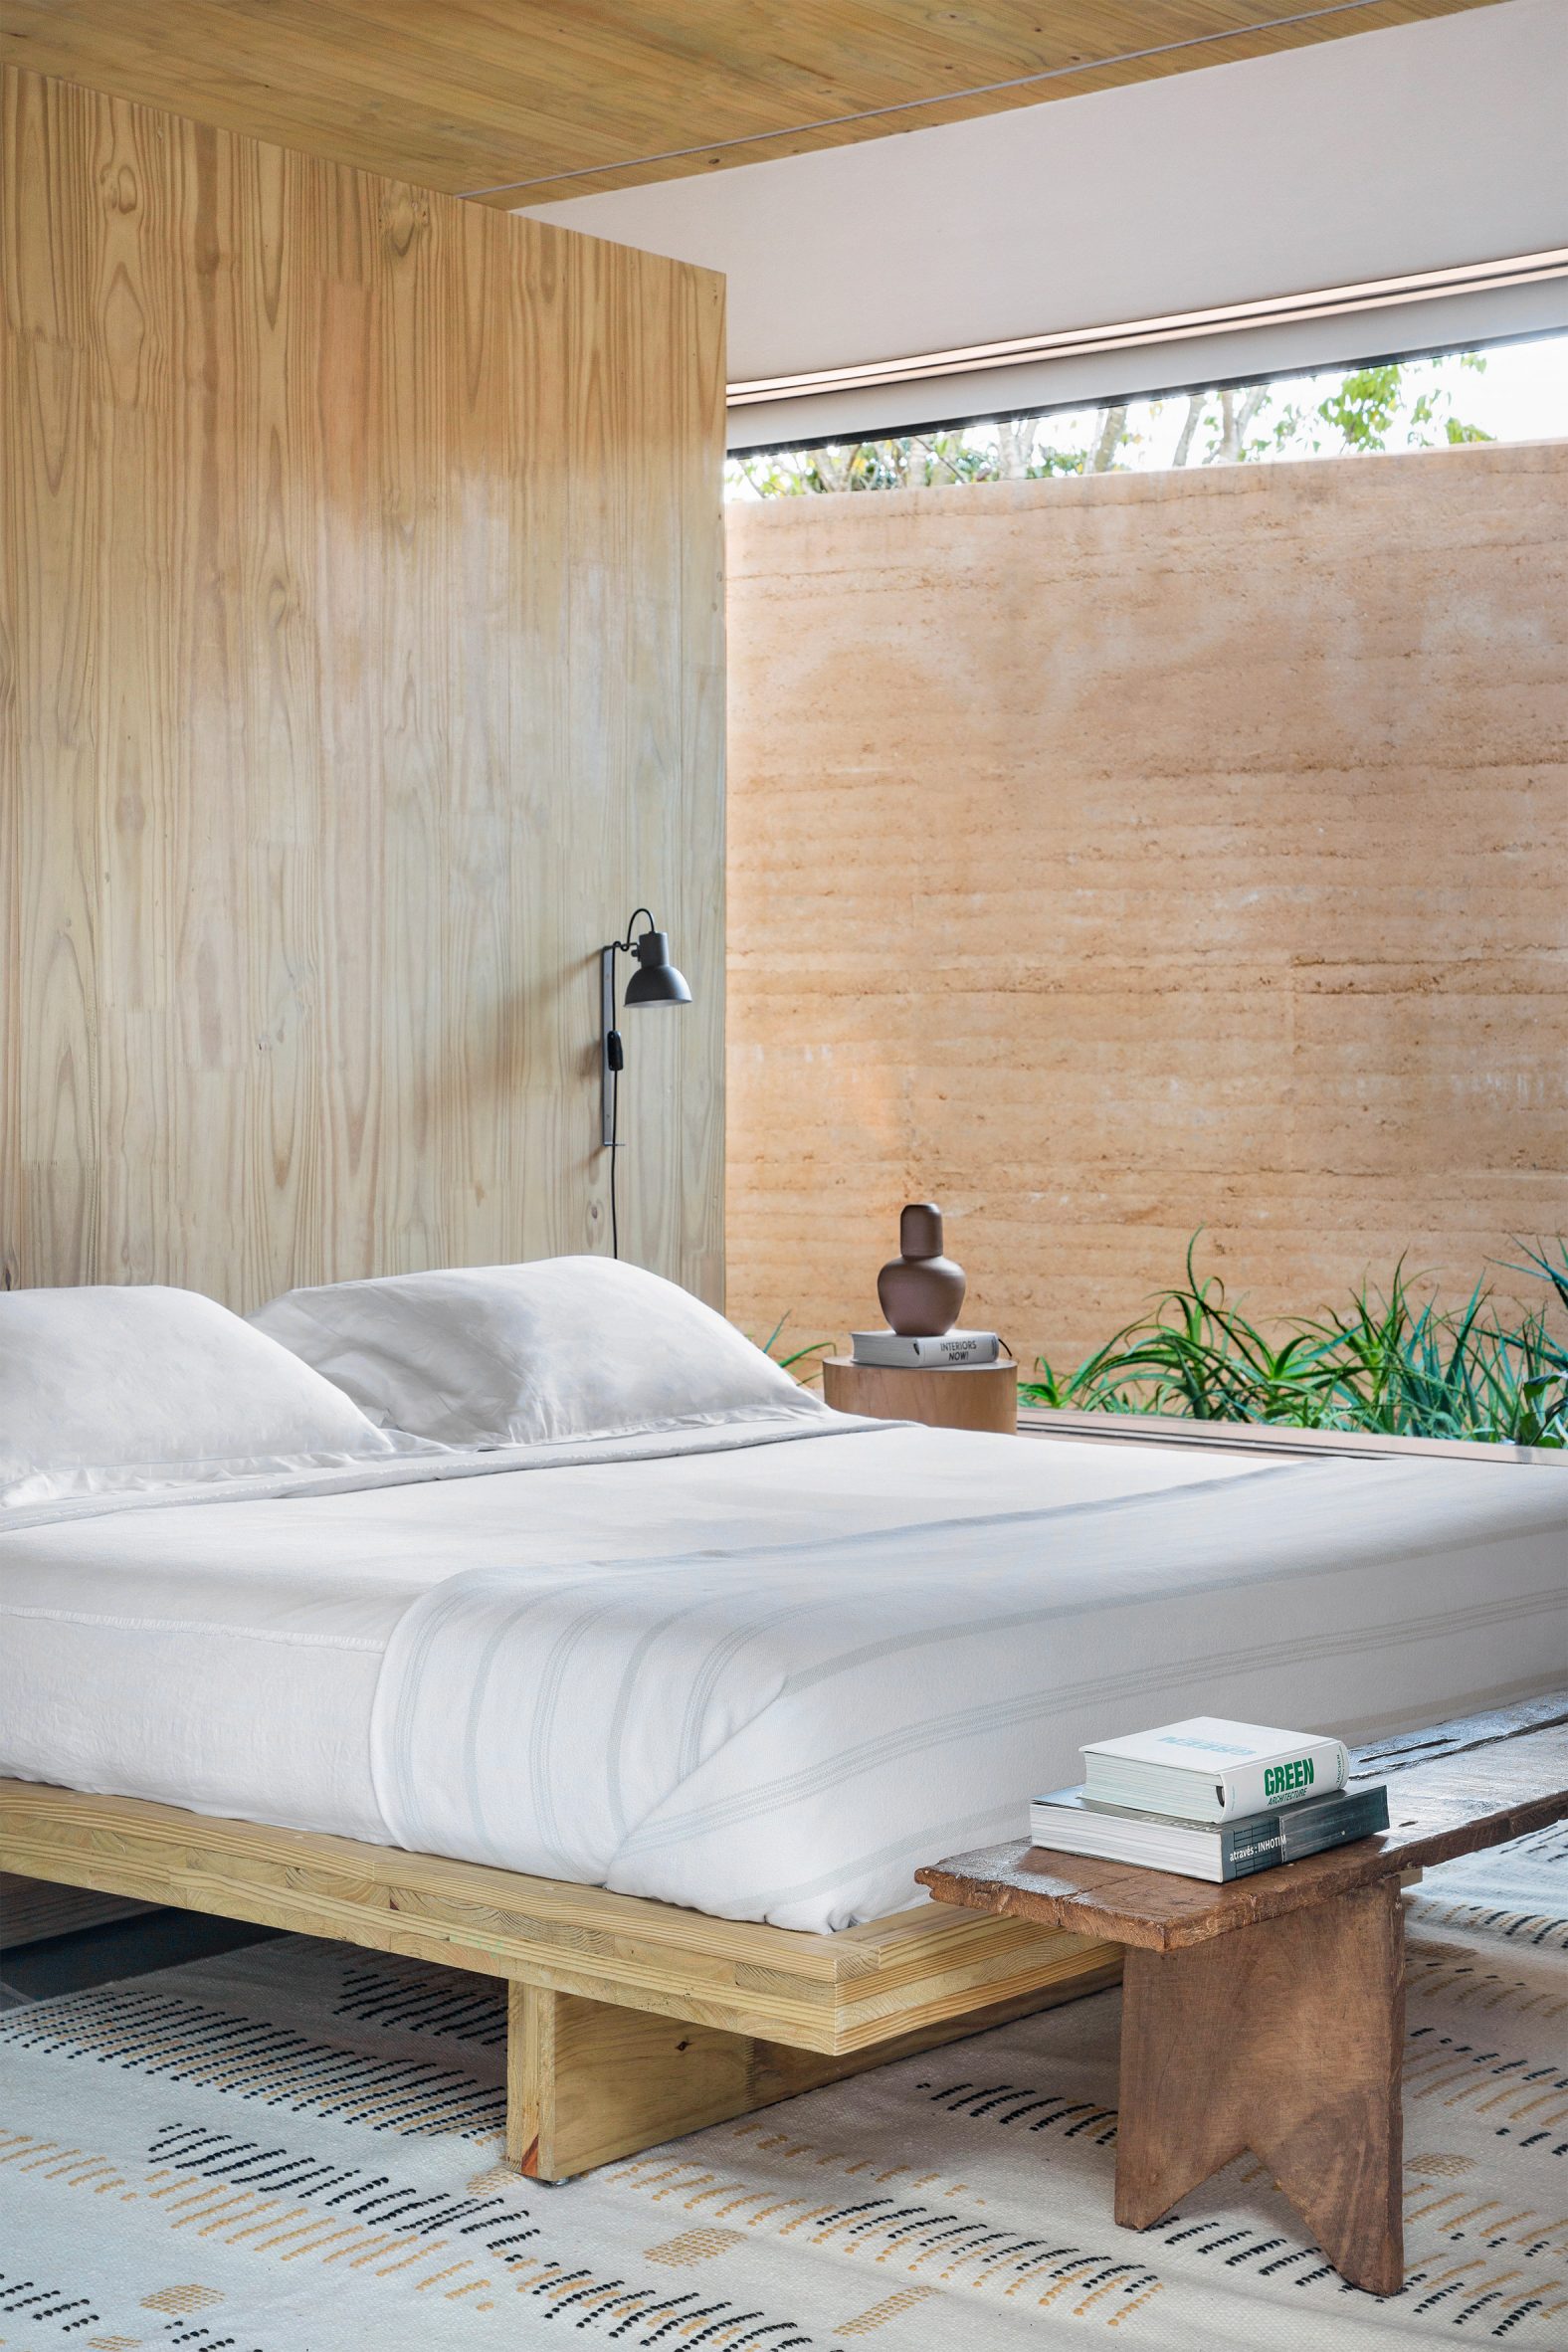 Bedroom with timber wall and floor-to-ceiling window showing rammed earth wall